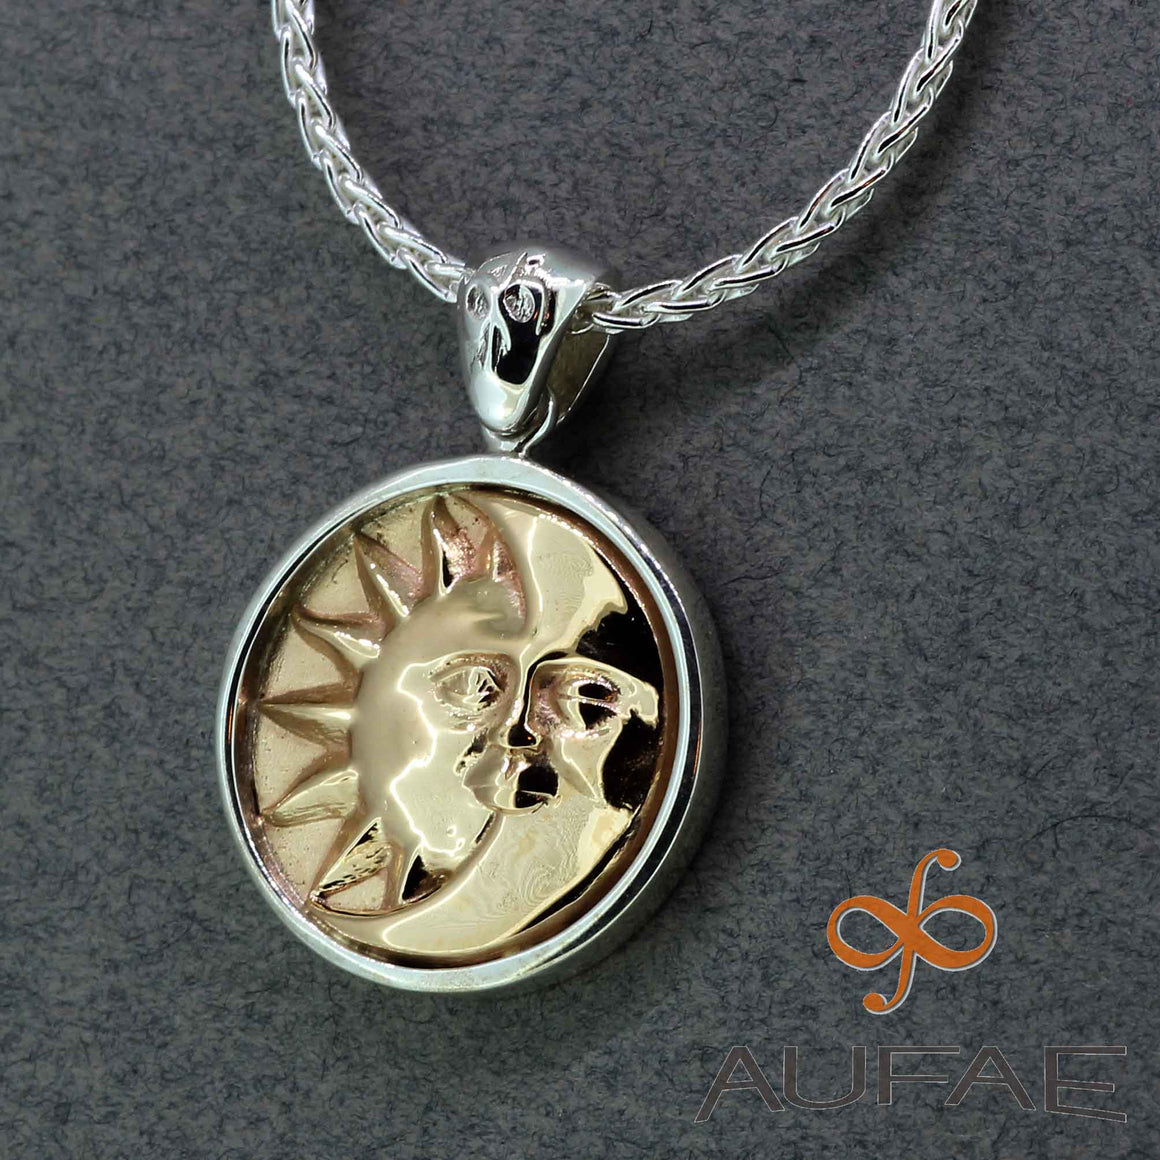 Aufae Sunmoon Pendant in Sterling Silver with 14K Yellow Gold SunMoon, 17mm